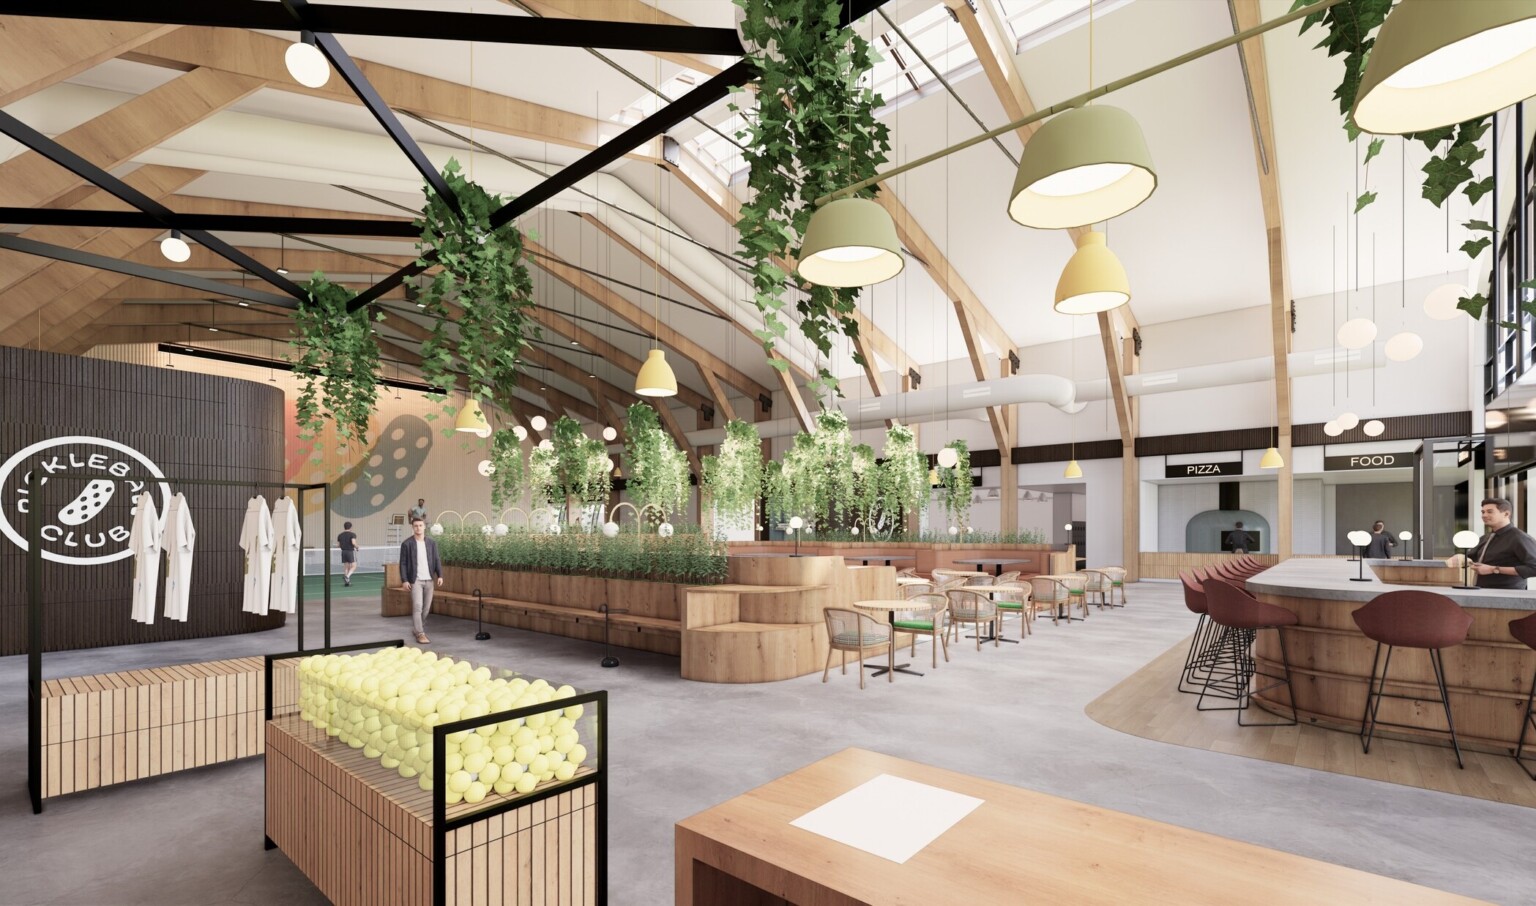 Food court in Pickle Ball area with skylights, natural daylight, custom lighting fixtures hang from high-ceilings, seating areas, and modern light wood furnishings